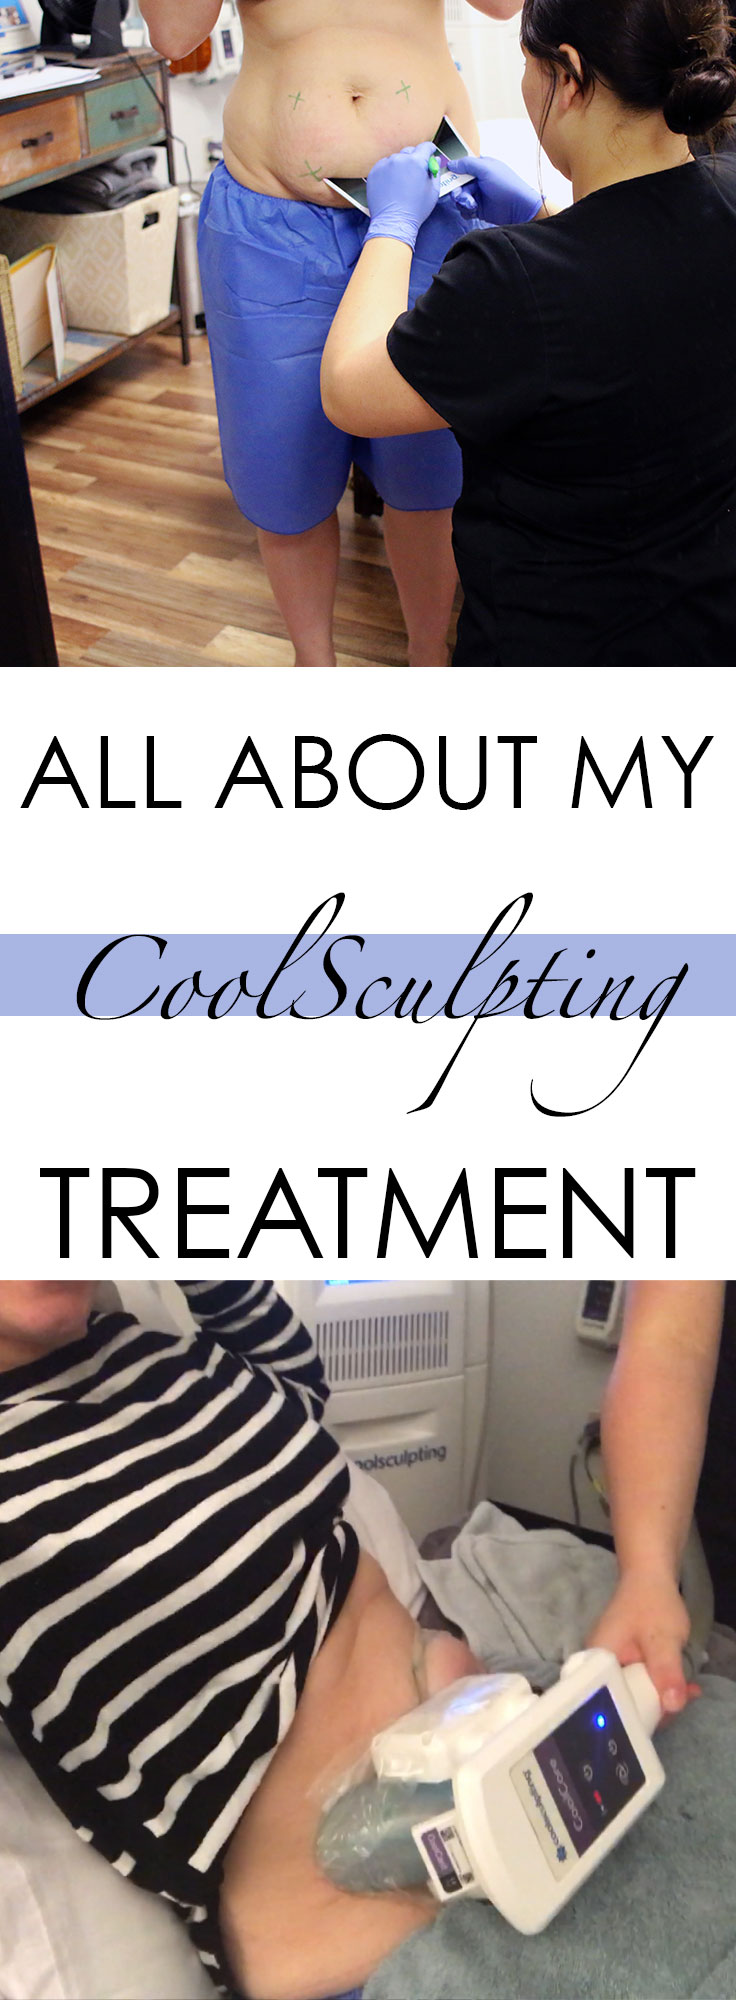 Where does the fat go during CoolSculpting? - Sheer Sculpt